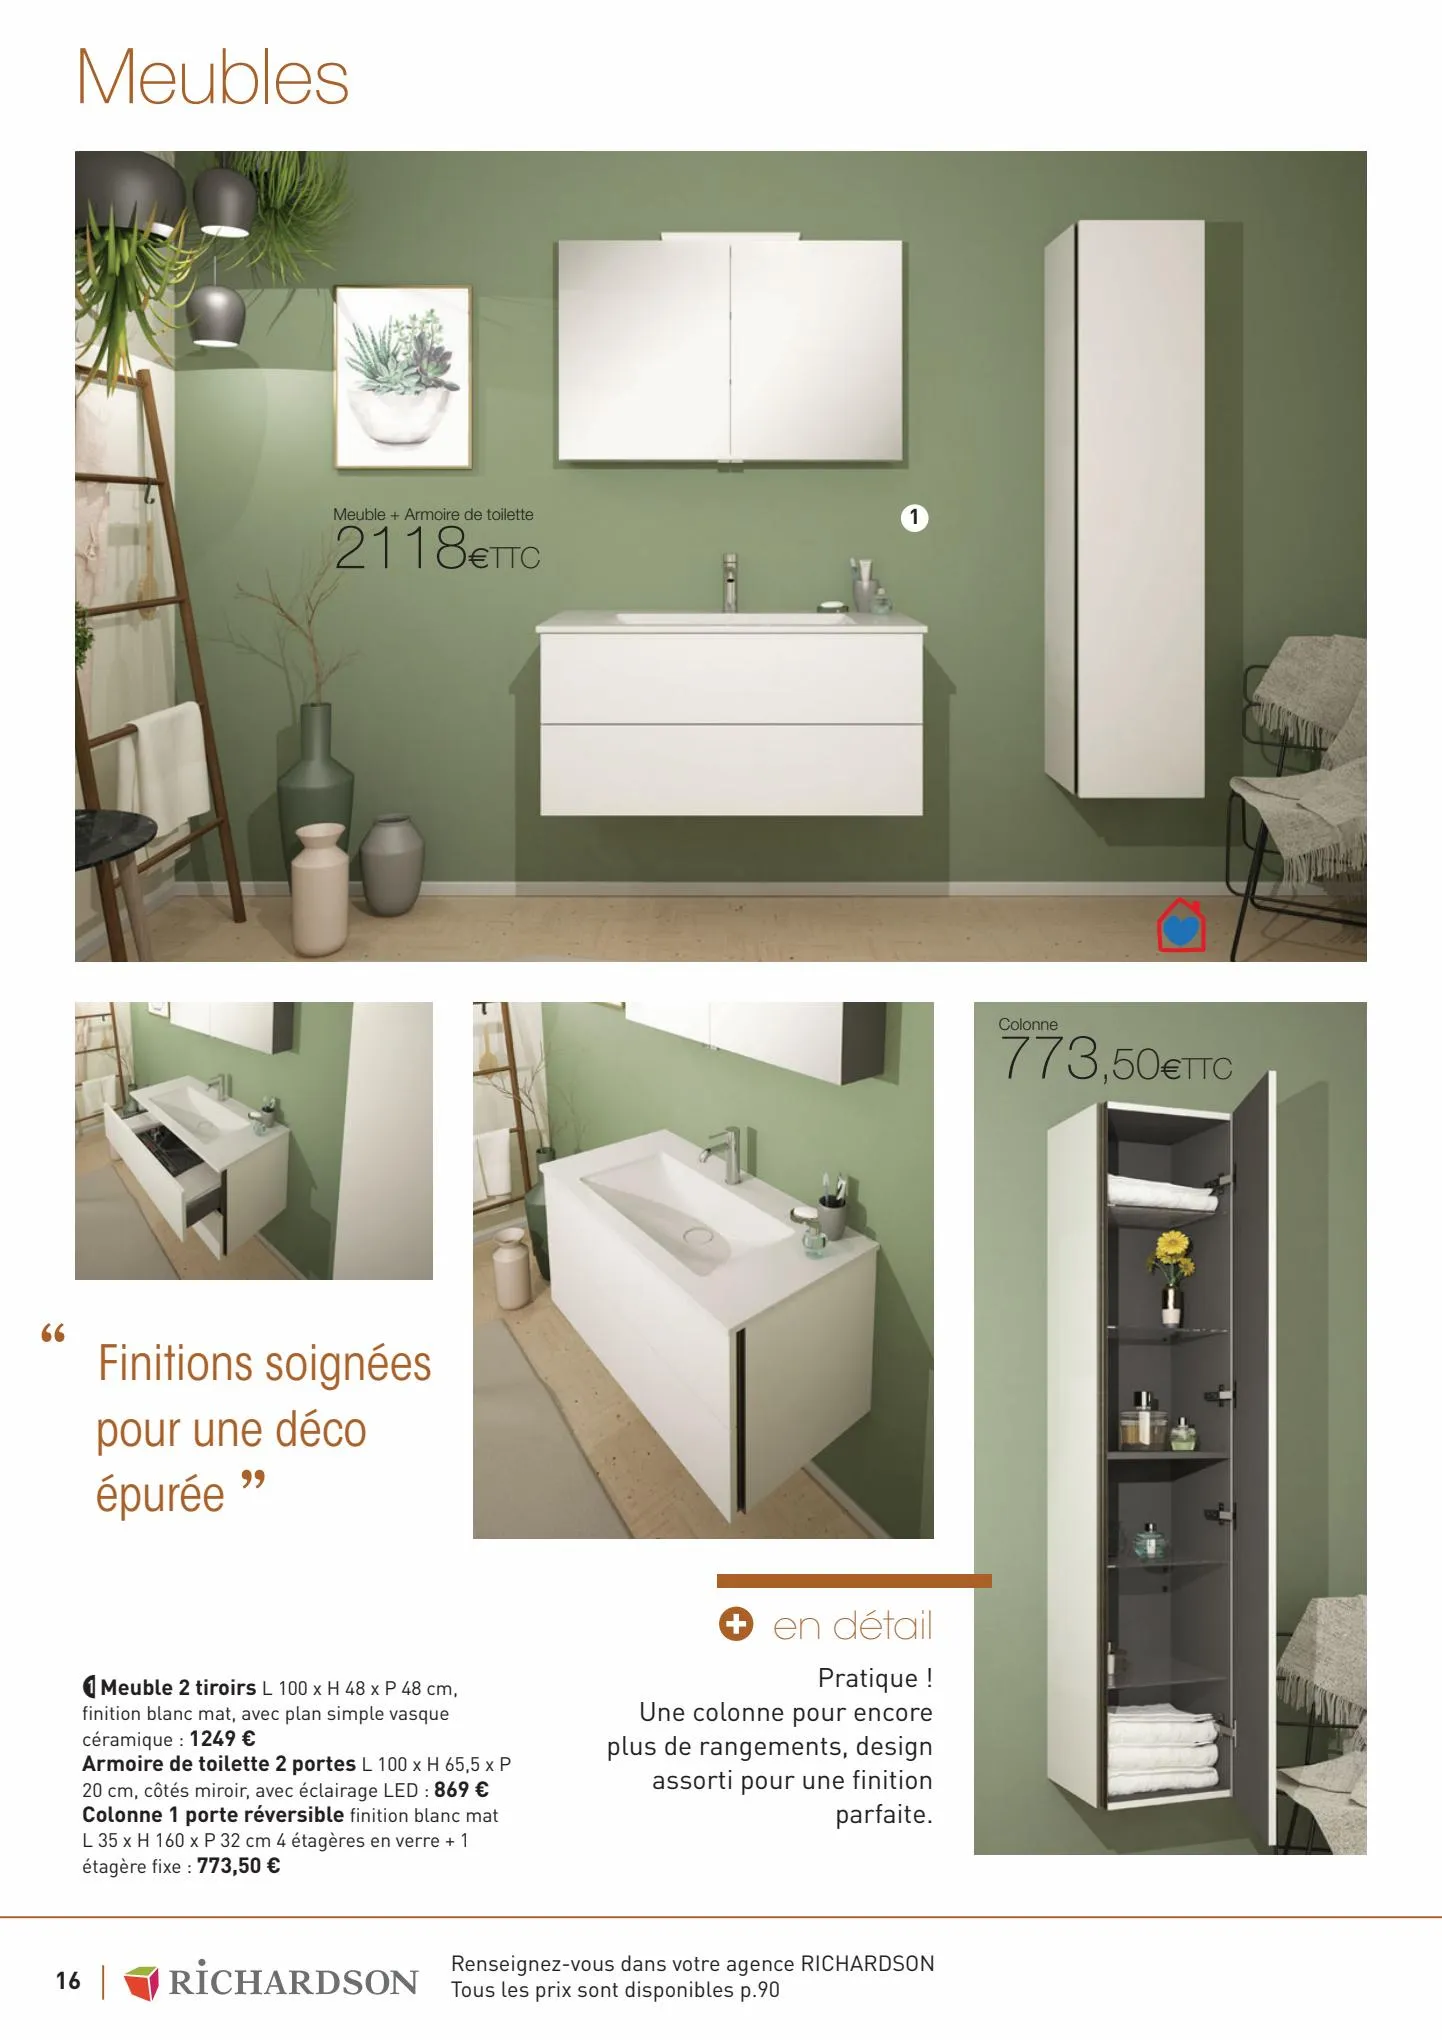 Catalogue Collections Exclusives et Carrelage 2022, page 00016